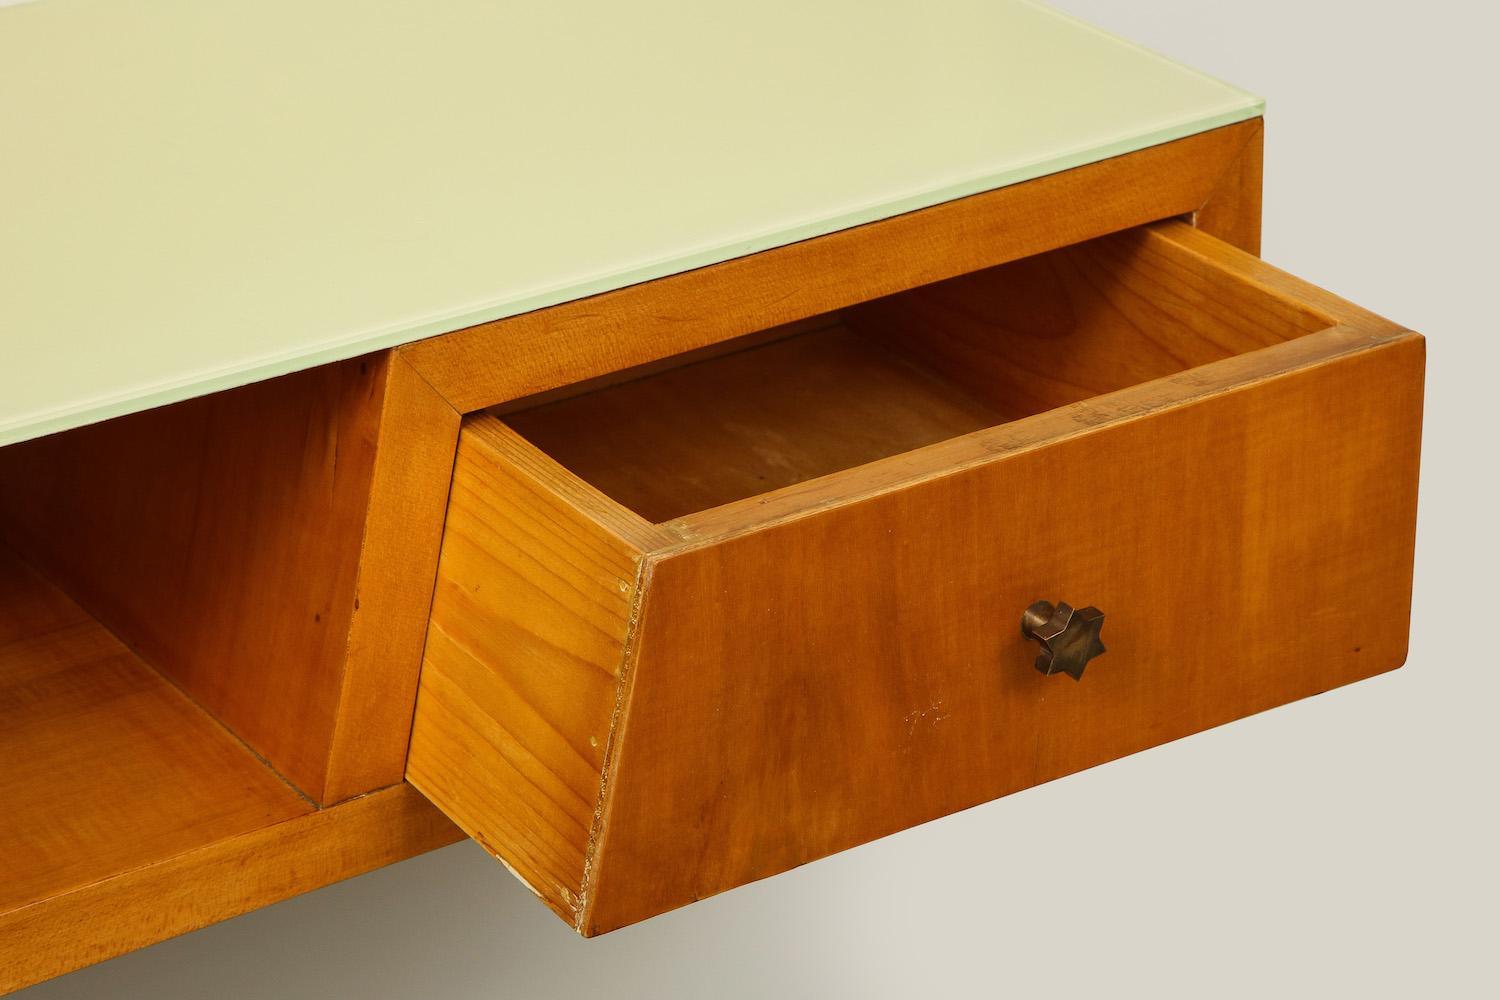 20th Century Wall-Mounted Console by Gio Ponti